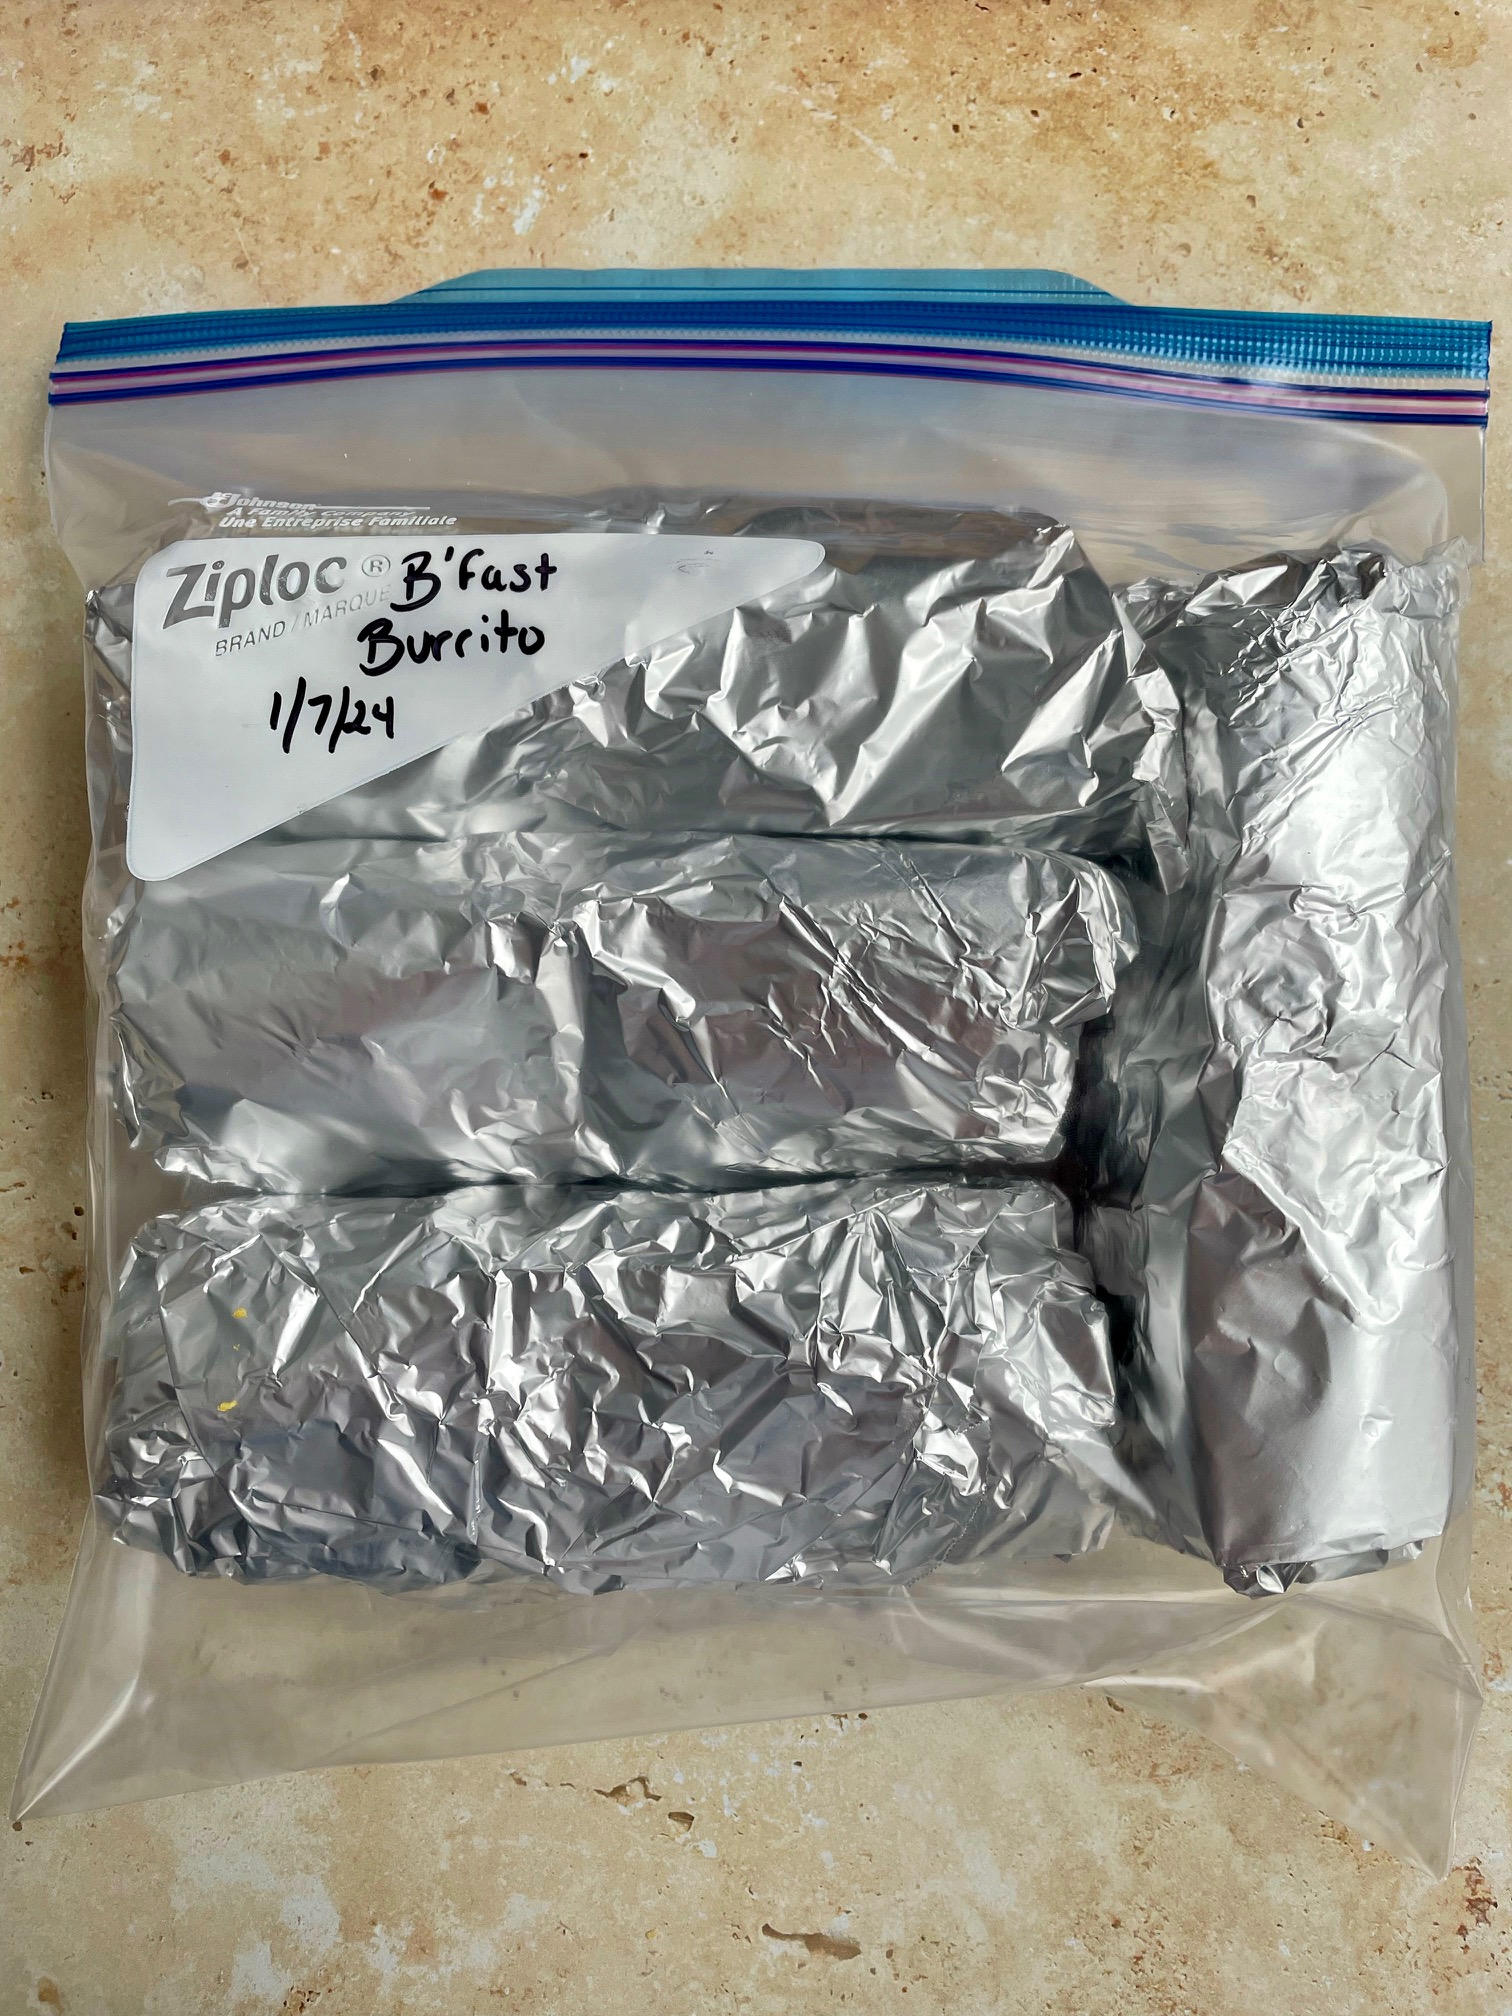 Breakfast burritos wrapped in aluminum foil and in a plastic bag ready for the freezer.